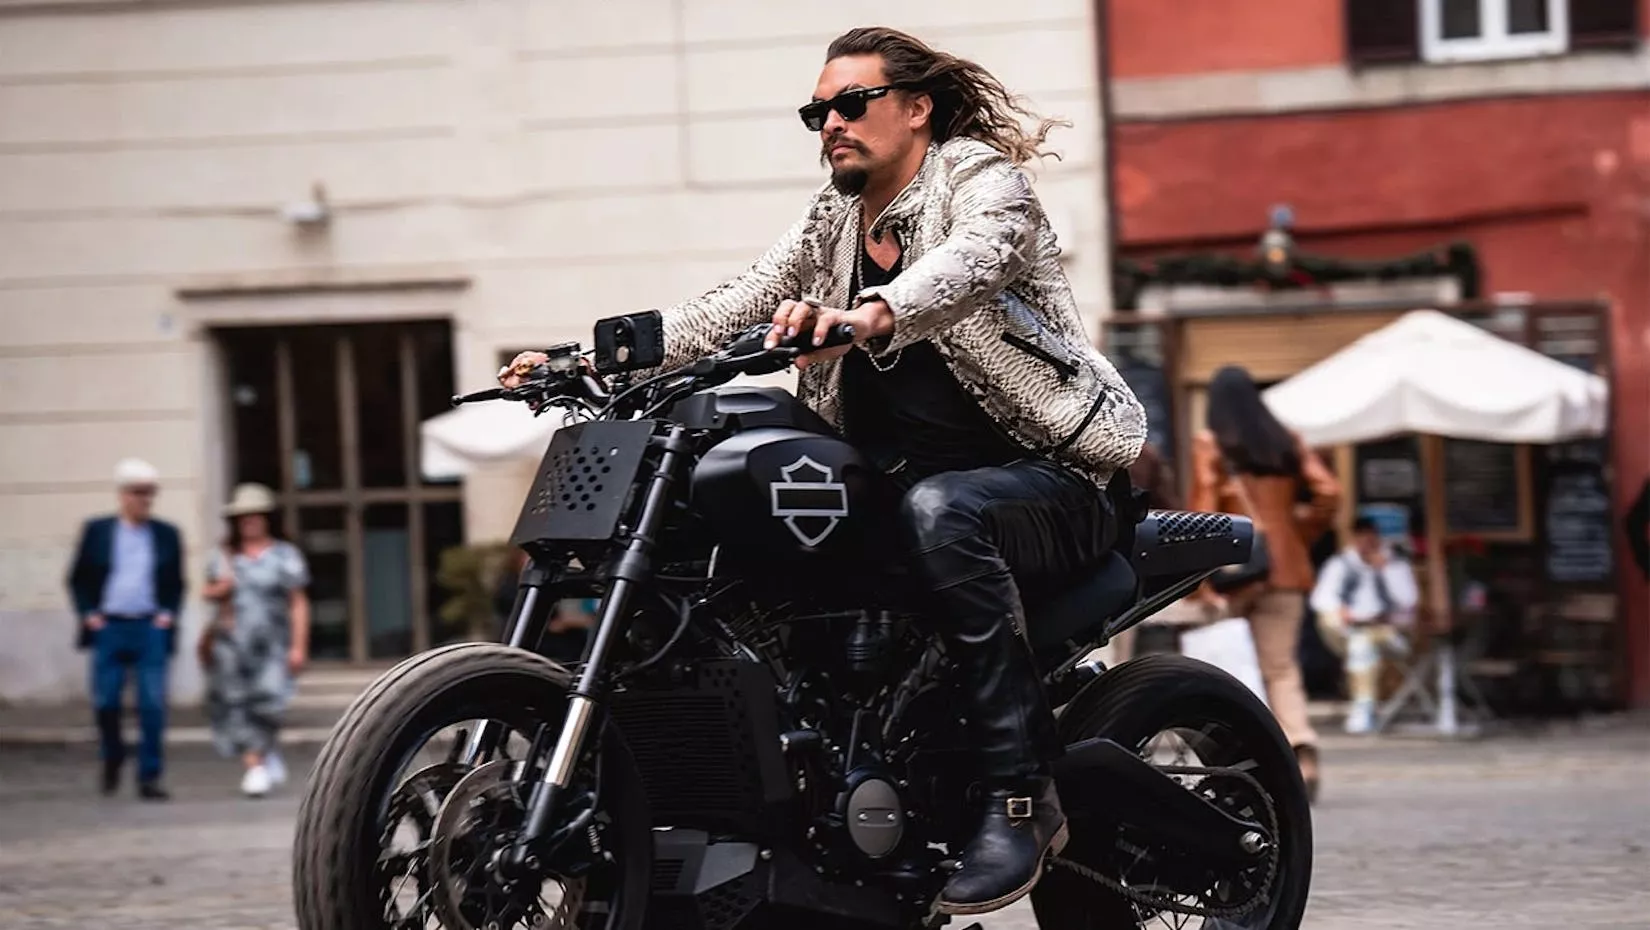 Jason Momoa is the standout of Fast X